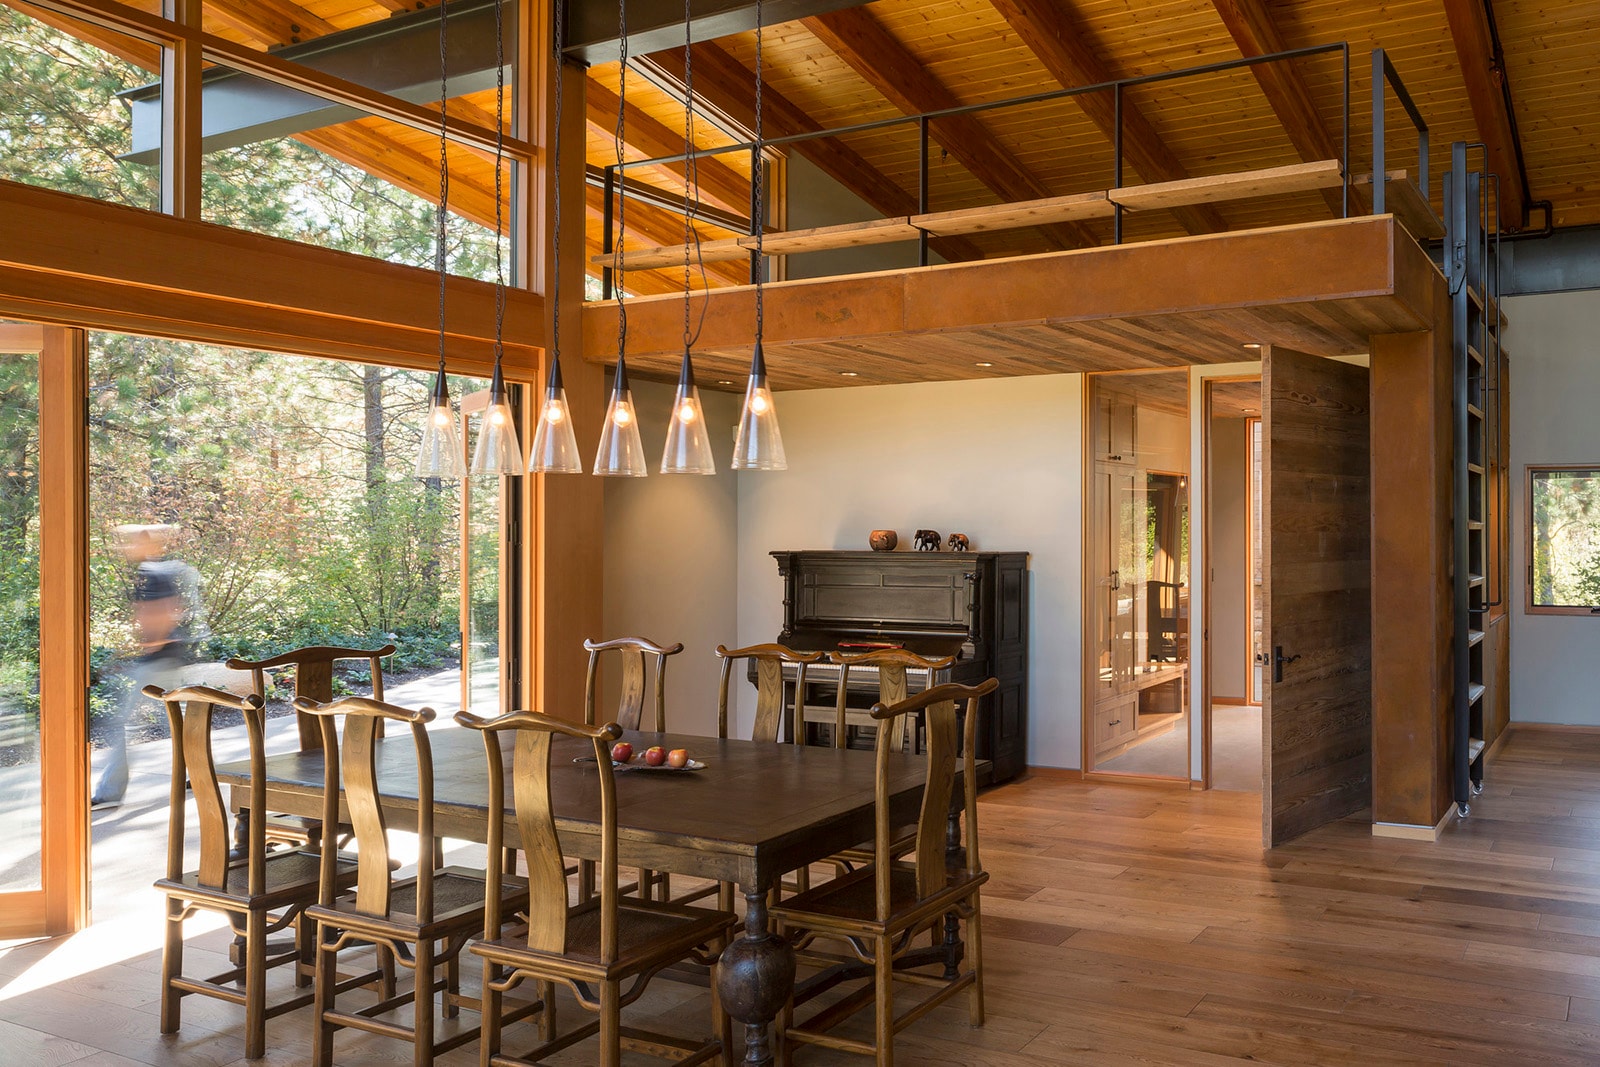 Tumble Creek Cabin Coates Design Architects Cle Elum United States Homes Houses Modern Wooden Open Glass